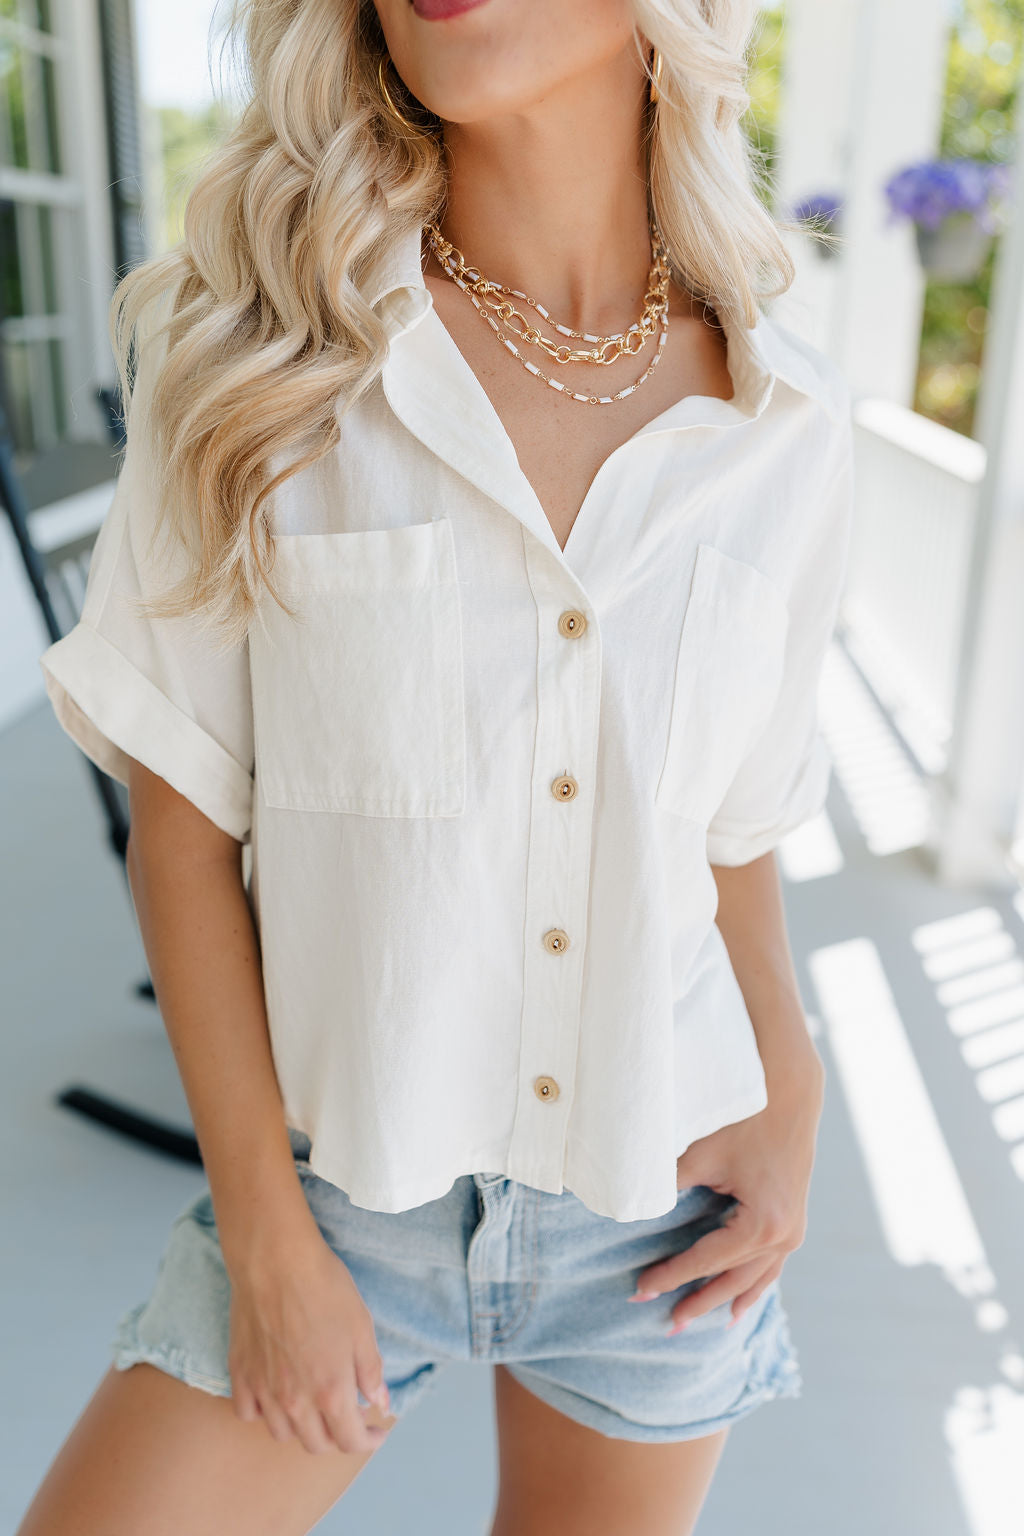 Close up view of female model wearing the Cora White Short Sleeve Button-Up Top which features Off White Linen Fabric, Wooden Button Up Front Closure, Collared Neckline, Short Sleeves and Front Chest